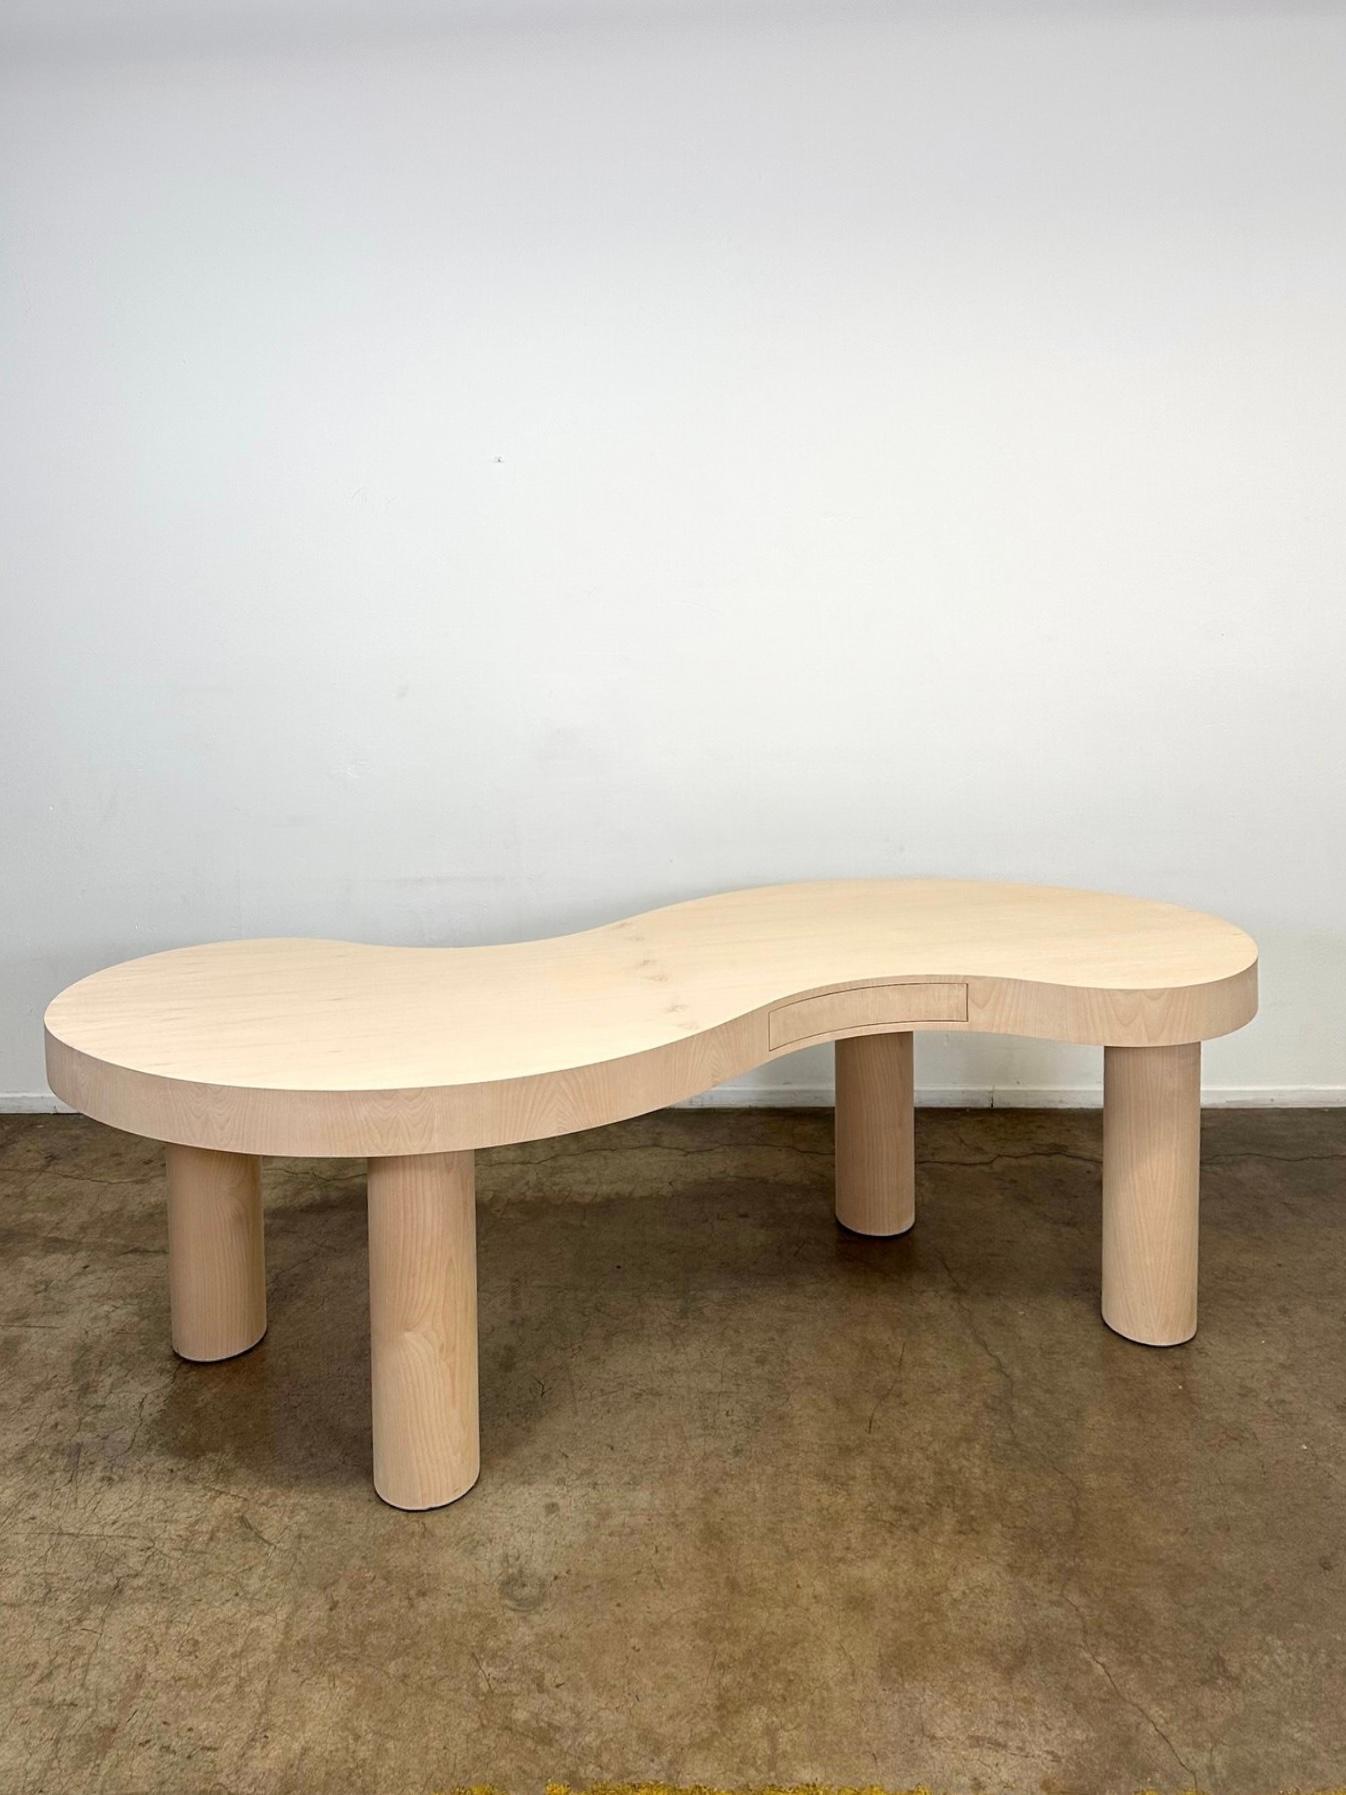 Measures: W95 D36 H30.5 KC25.5

Tilde (~) Coworking desk handcrafted in house, made in a mix of solid wood and birch veneer. Unsealed so that you can choose your own stain and finish. This squiggle like desk is designed to seat a person in each